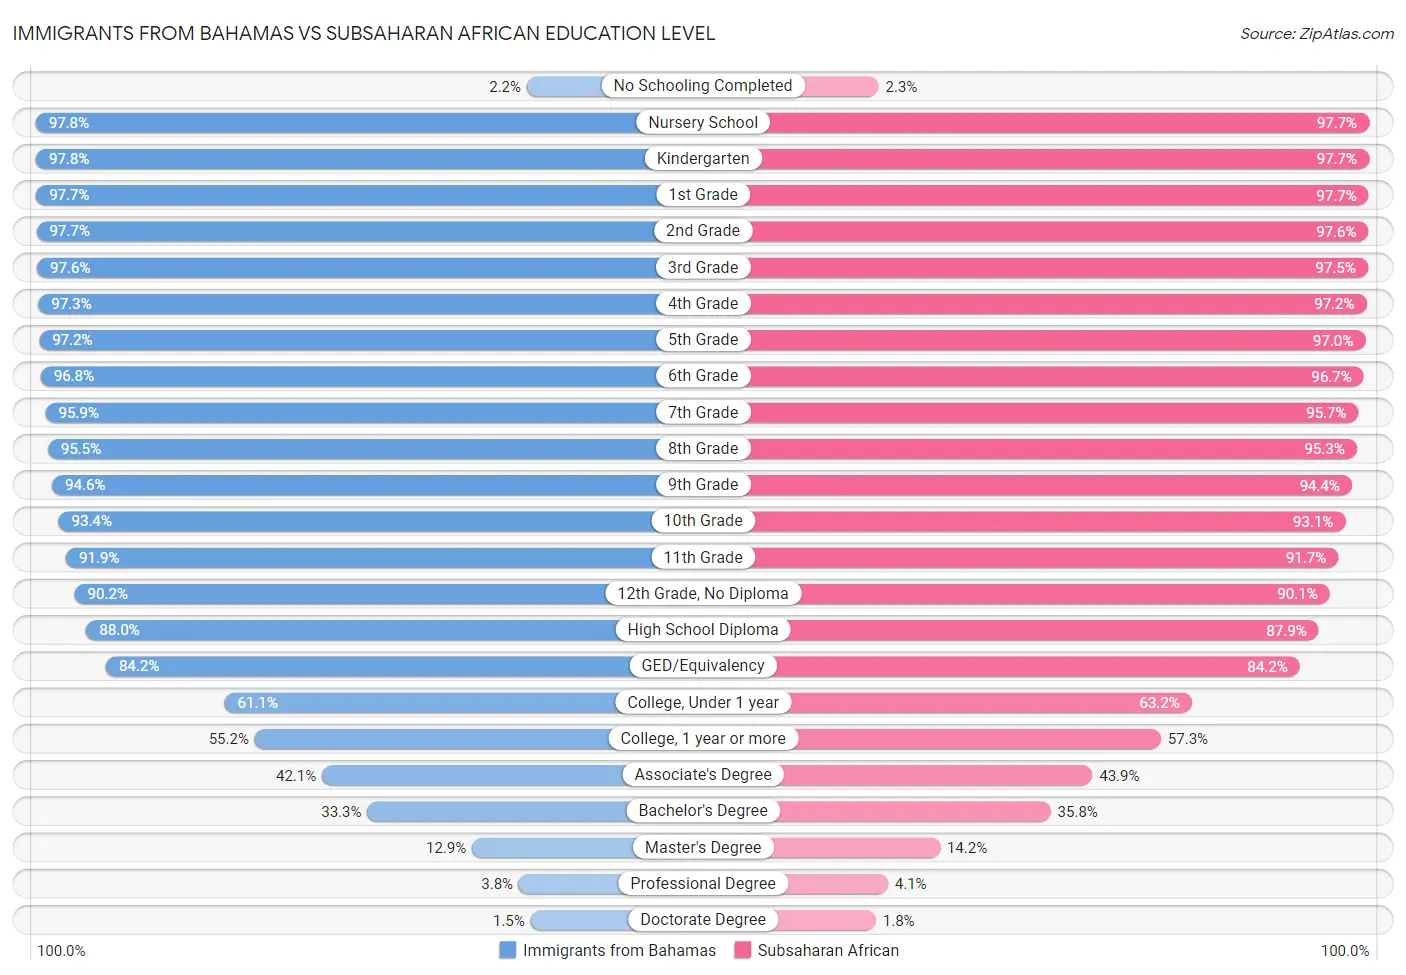 Immigrants from Bahamas vs Subsaharan African Education Level